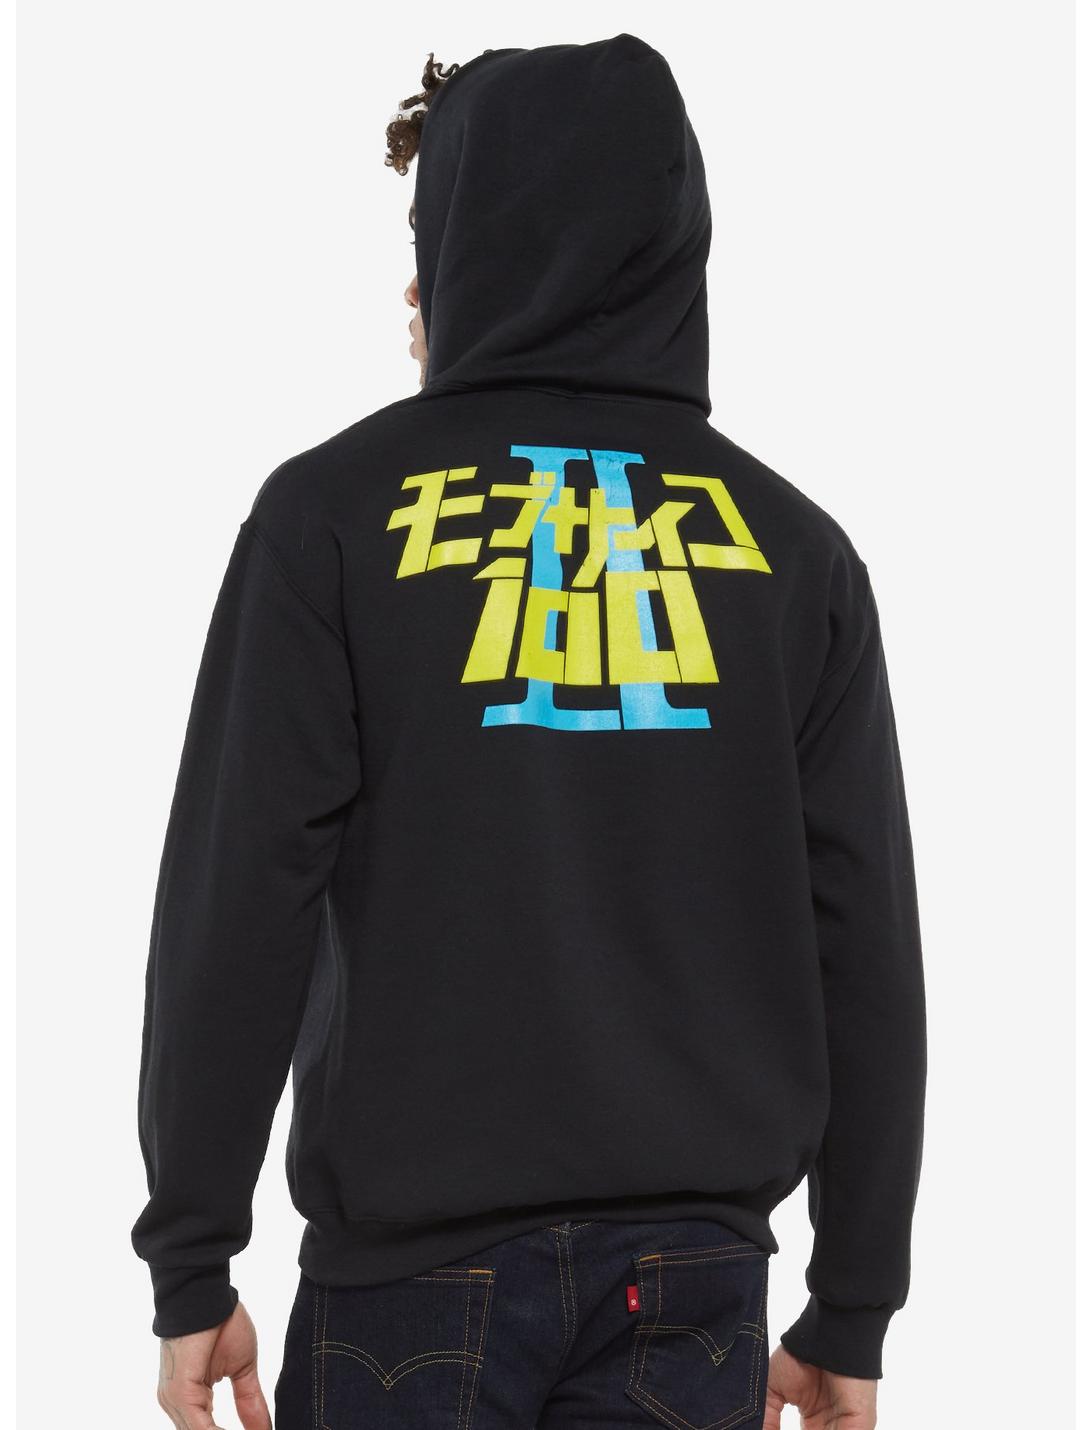 Black Mob Psycho 100 Anime Double-Sided Hoodie